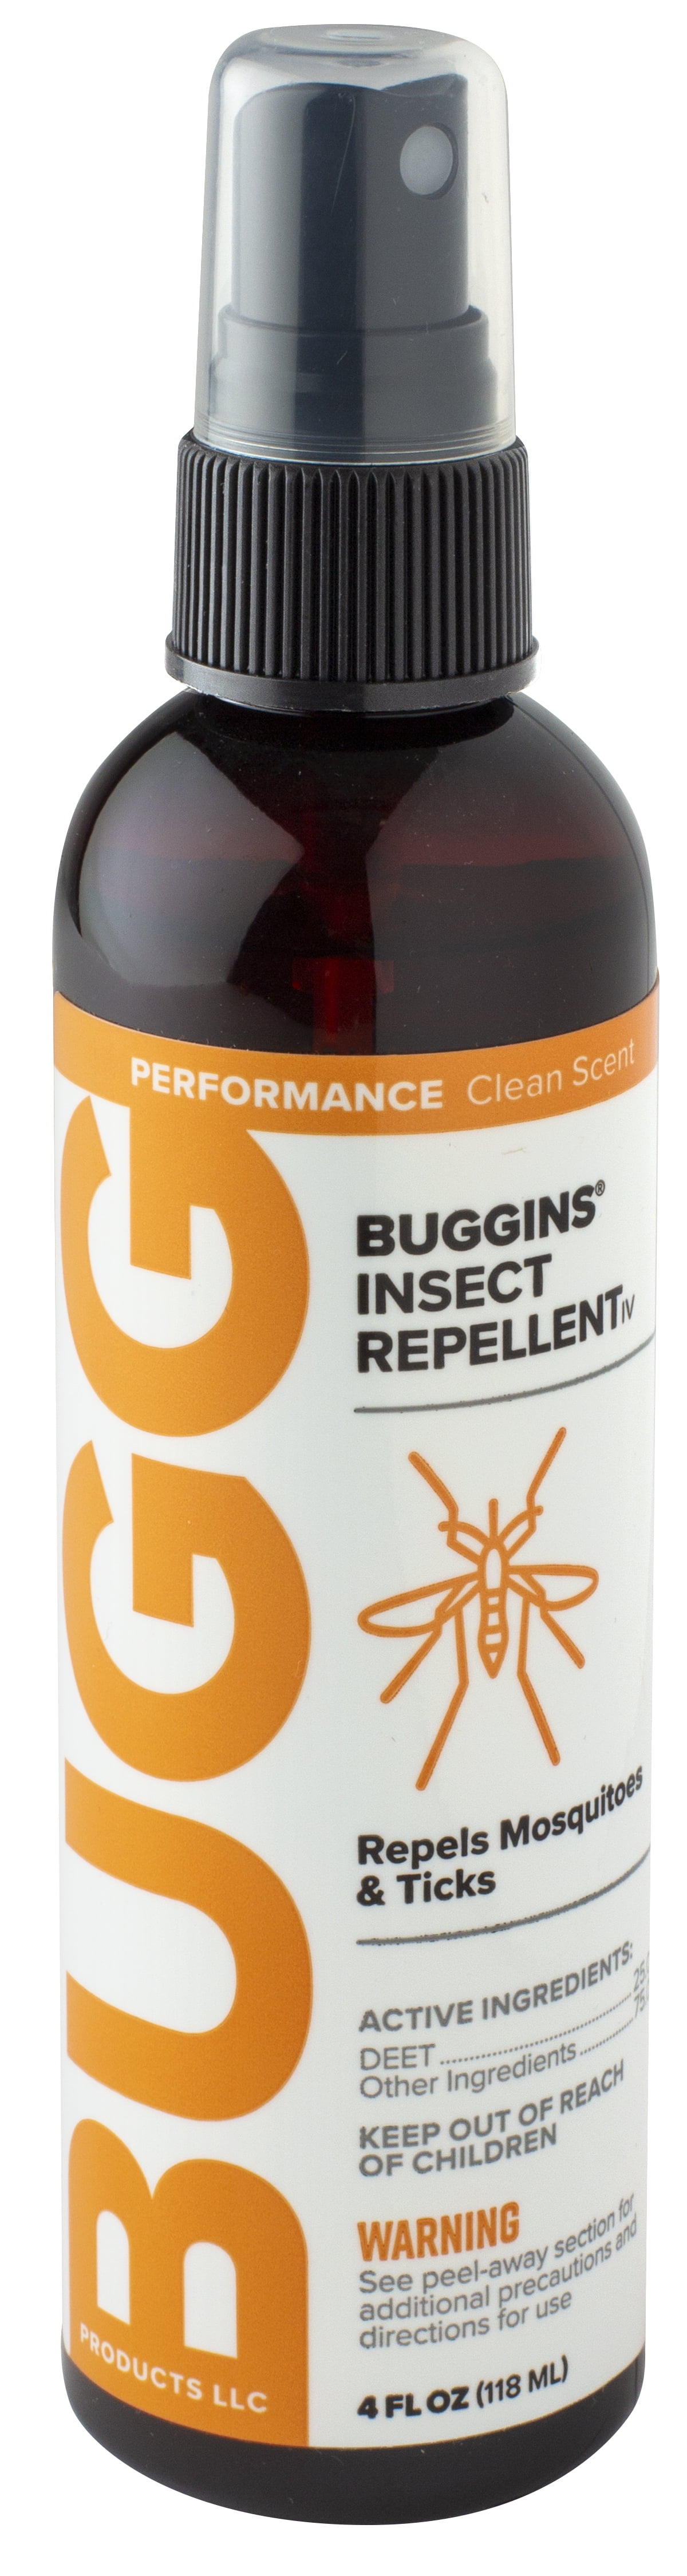 Picture of Buggspray 7263254 4 oz Deet 25 Percent Insect Repellent